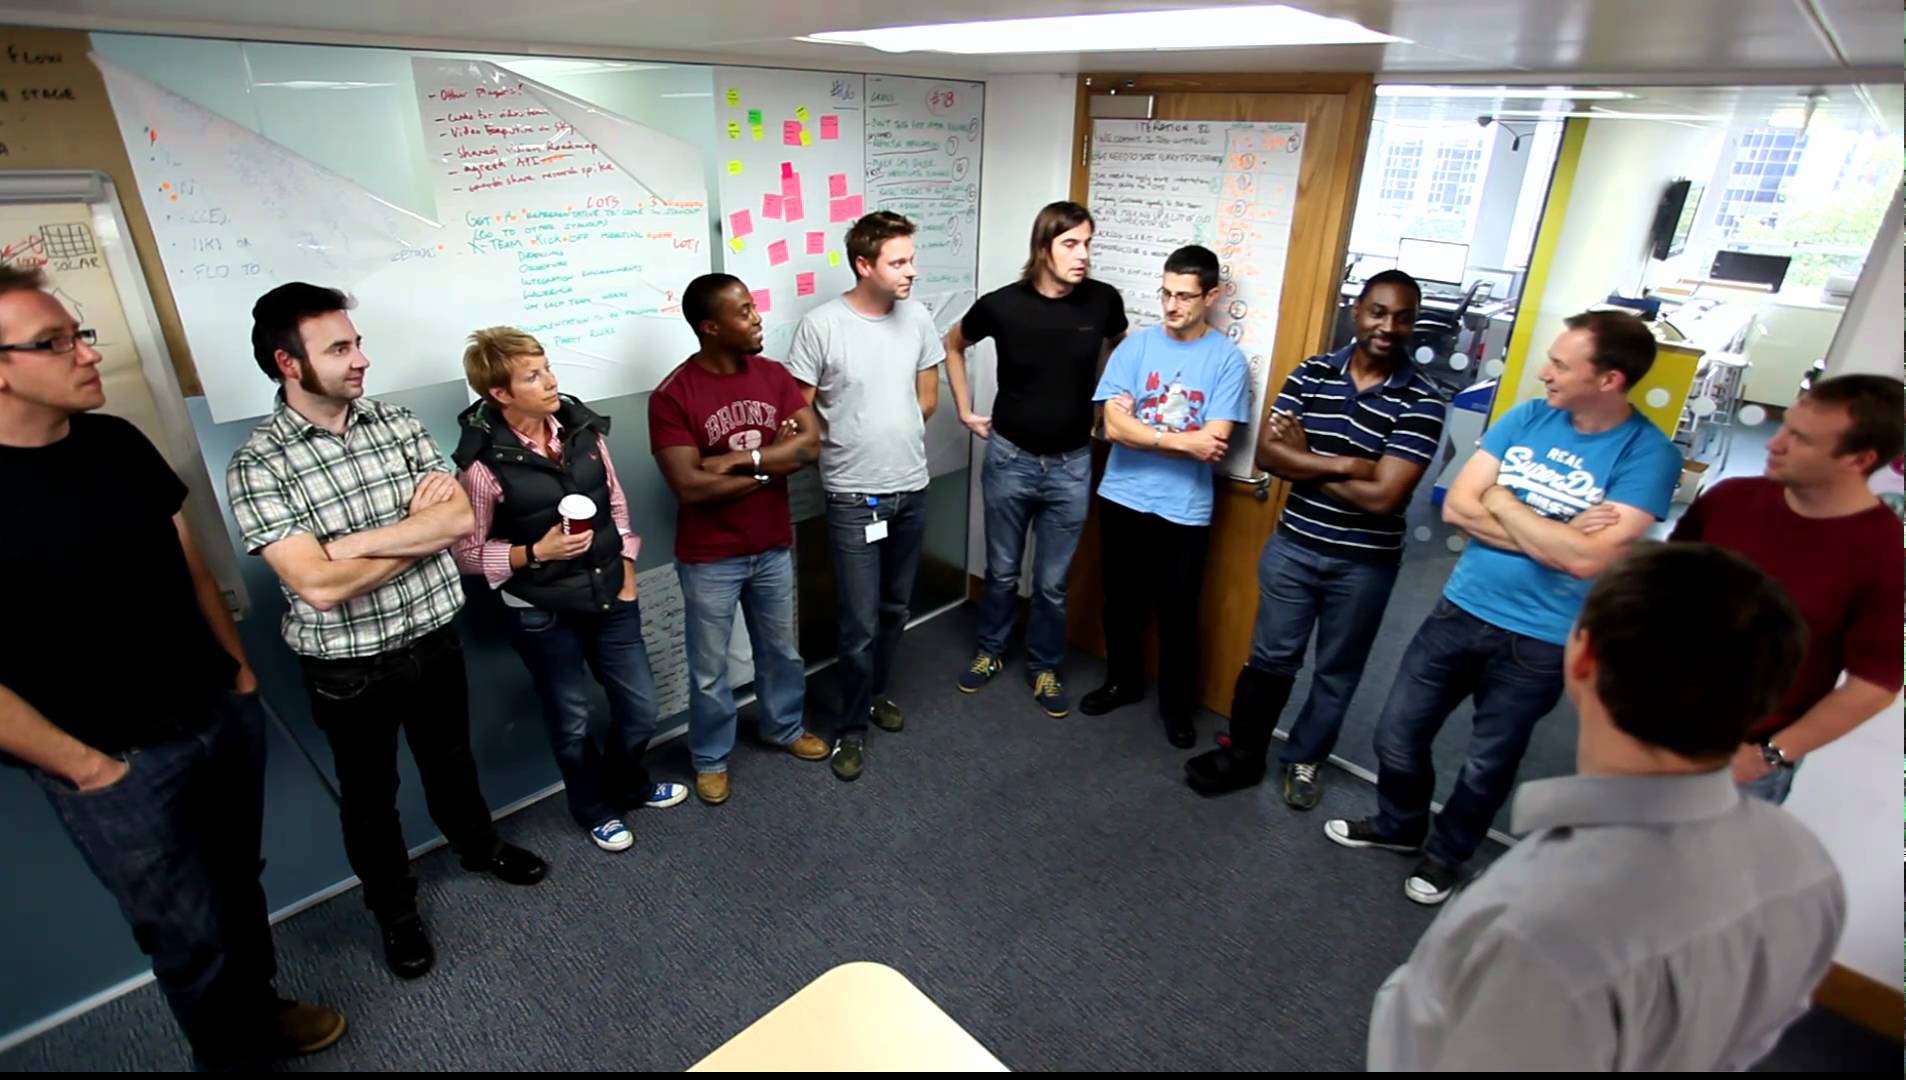 scrum-standup-meeting-team-stand-up-leveling-up-your-scrum-daily-stand-up-game.jpg